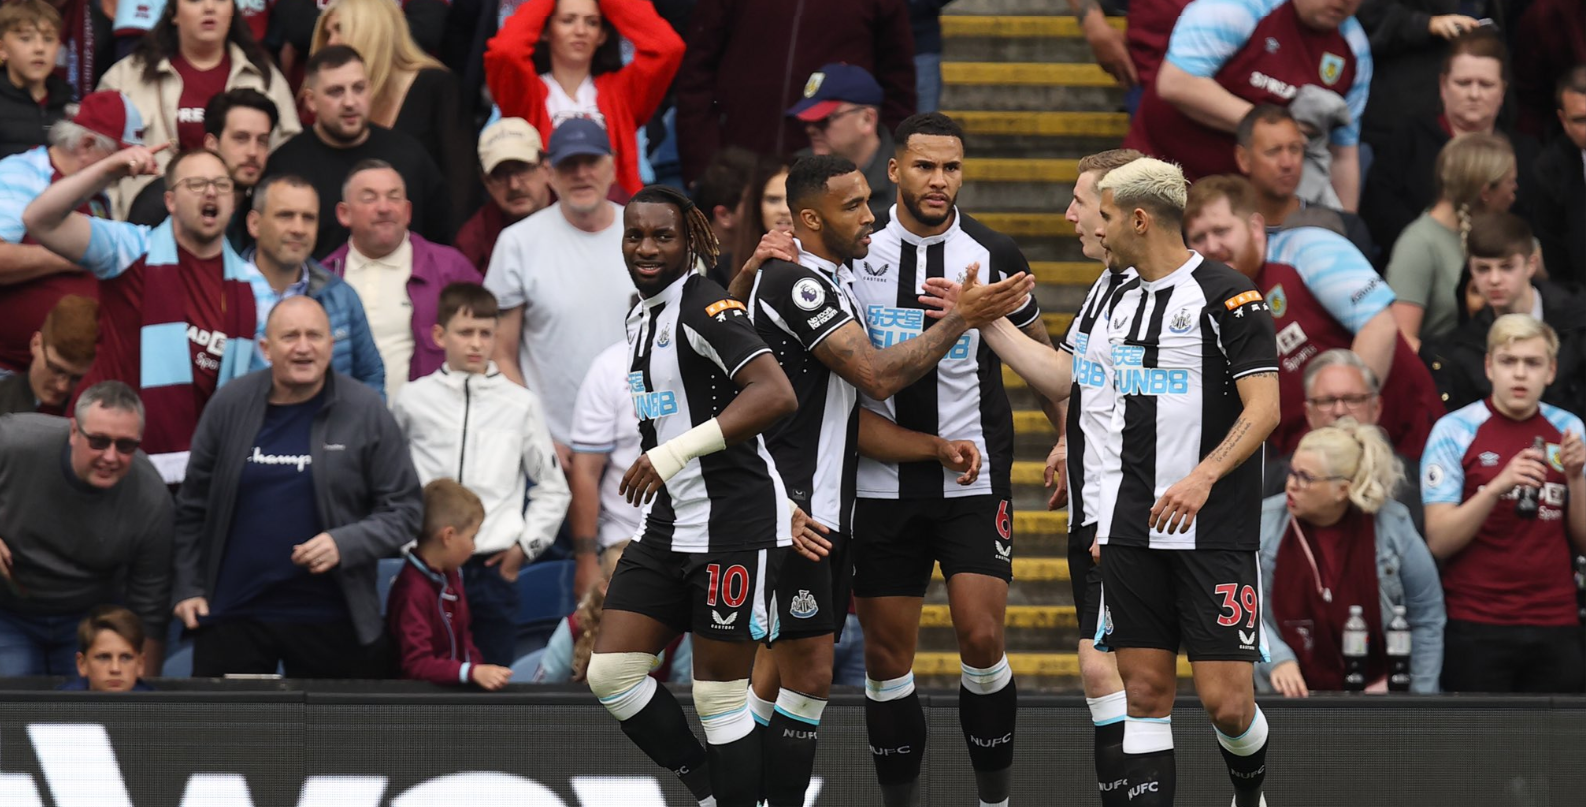  NUFC player ratings vs Burnley – One 9, two 8’s, a few 7.5’s, several 7’s, a couple of 6’s and 